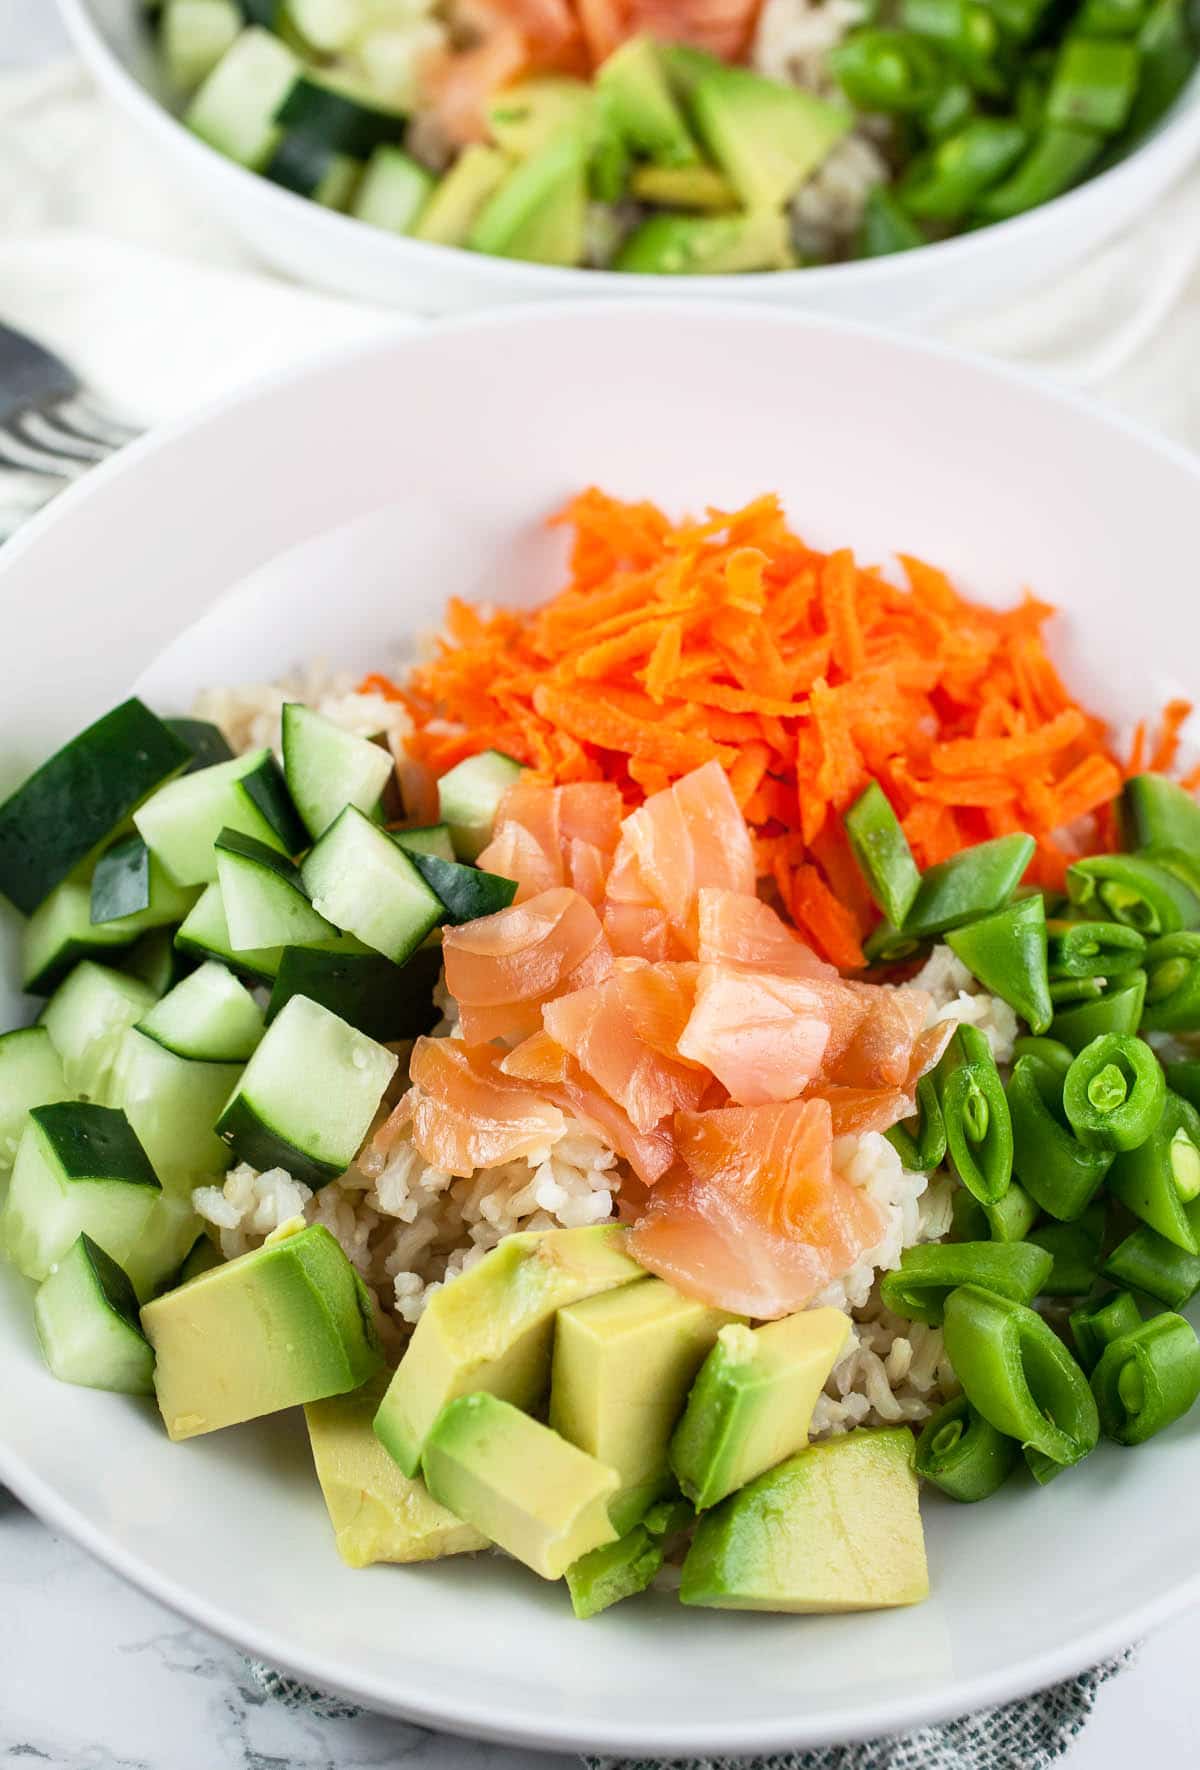 Diced avocado, snap peas, carrots, cucumber, and smoked salmon in white bowls.